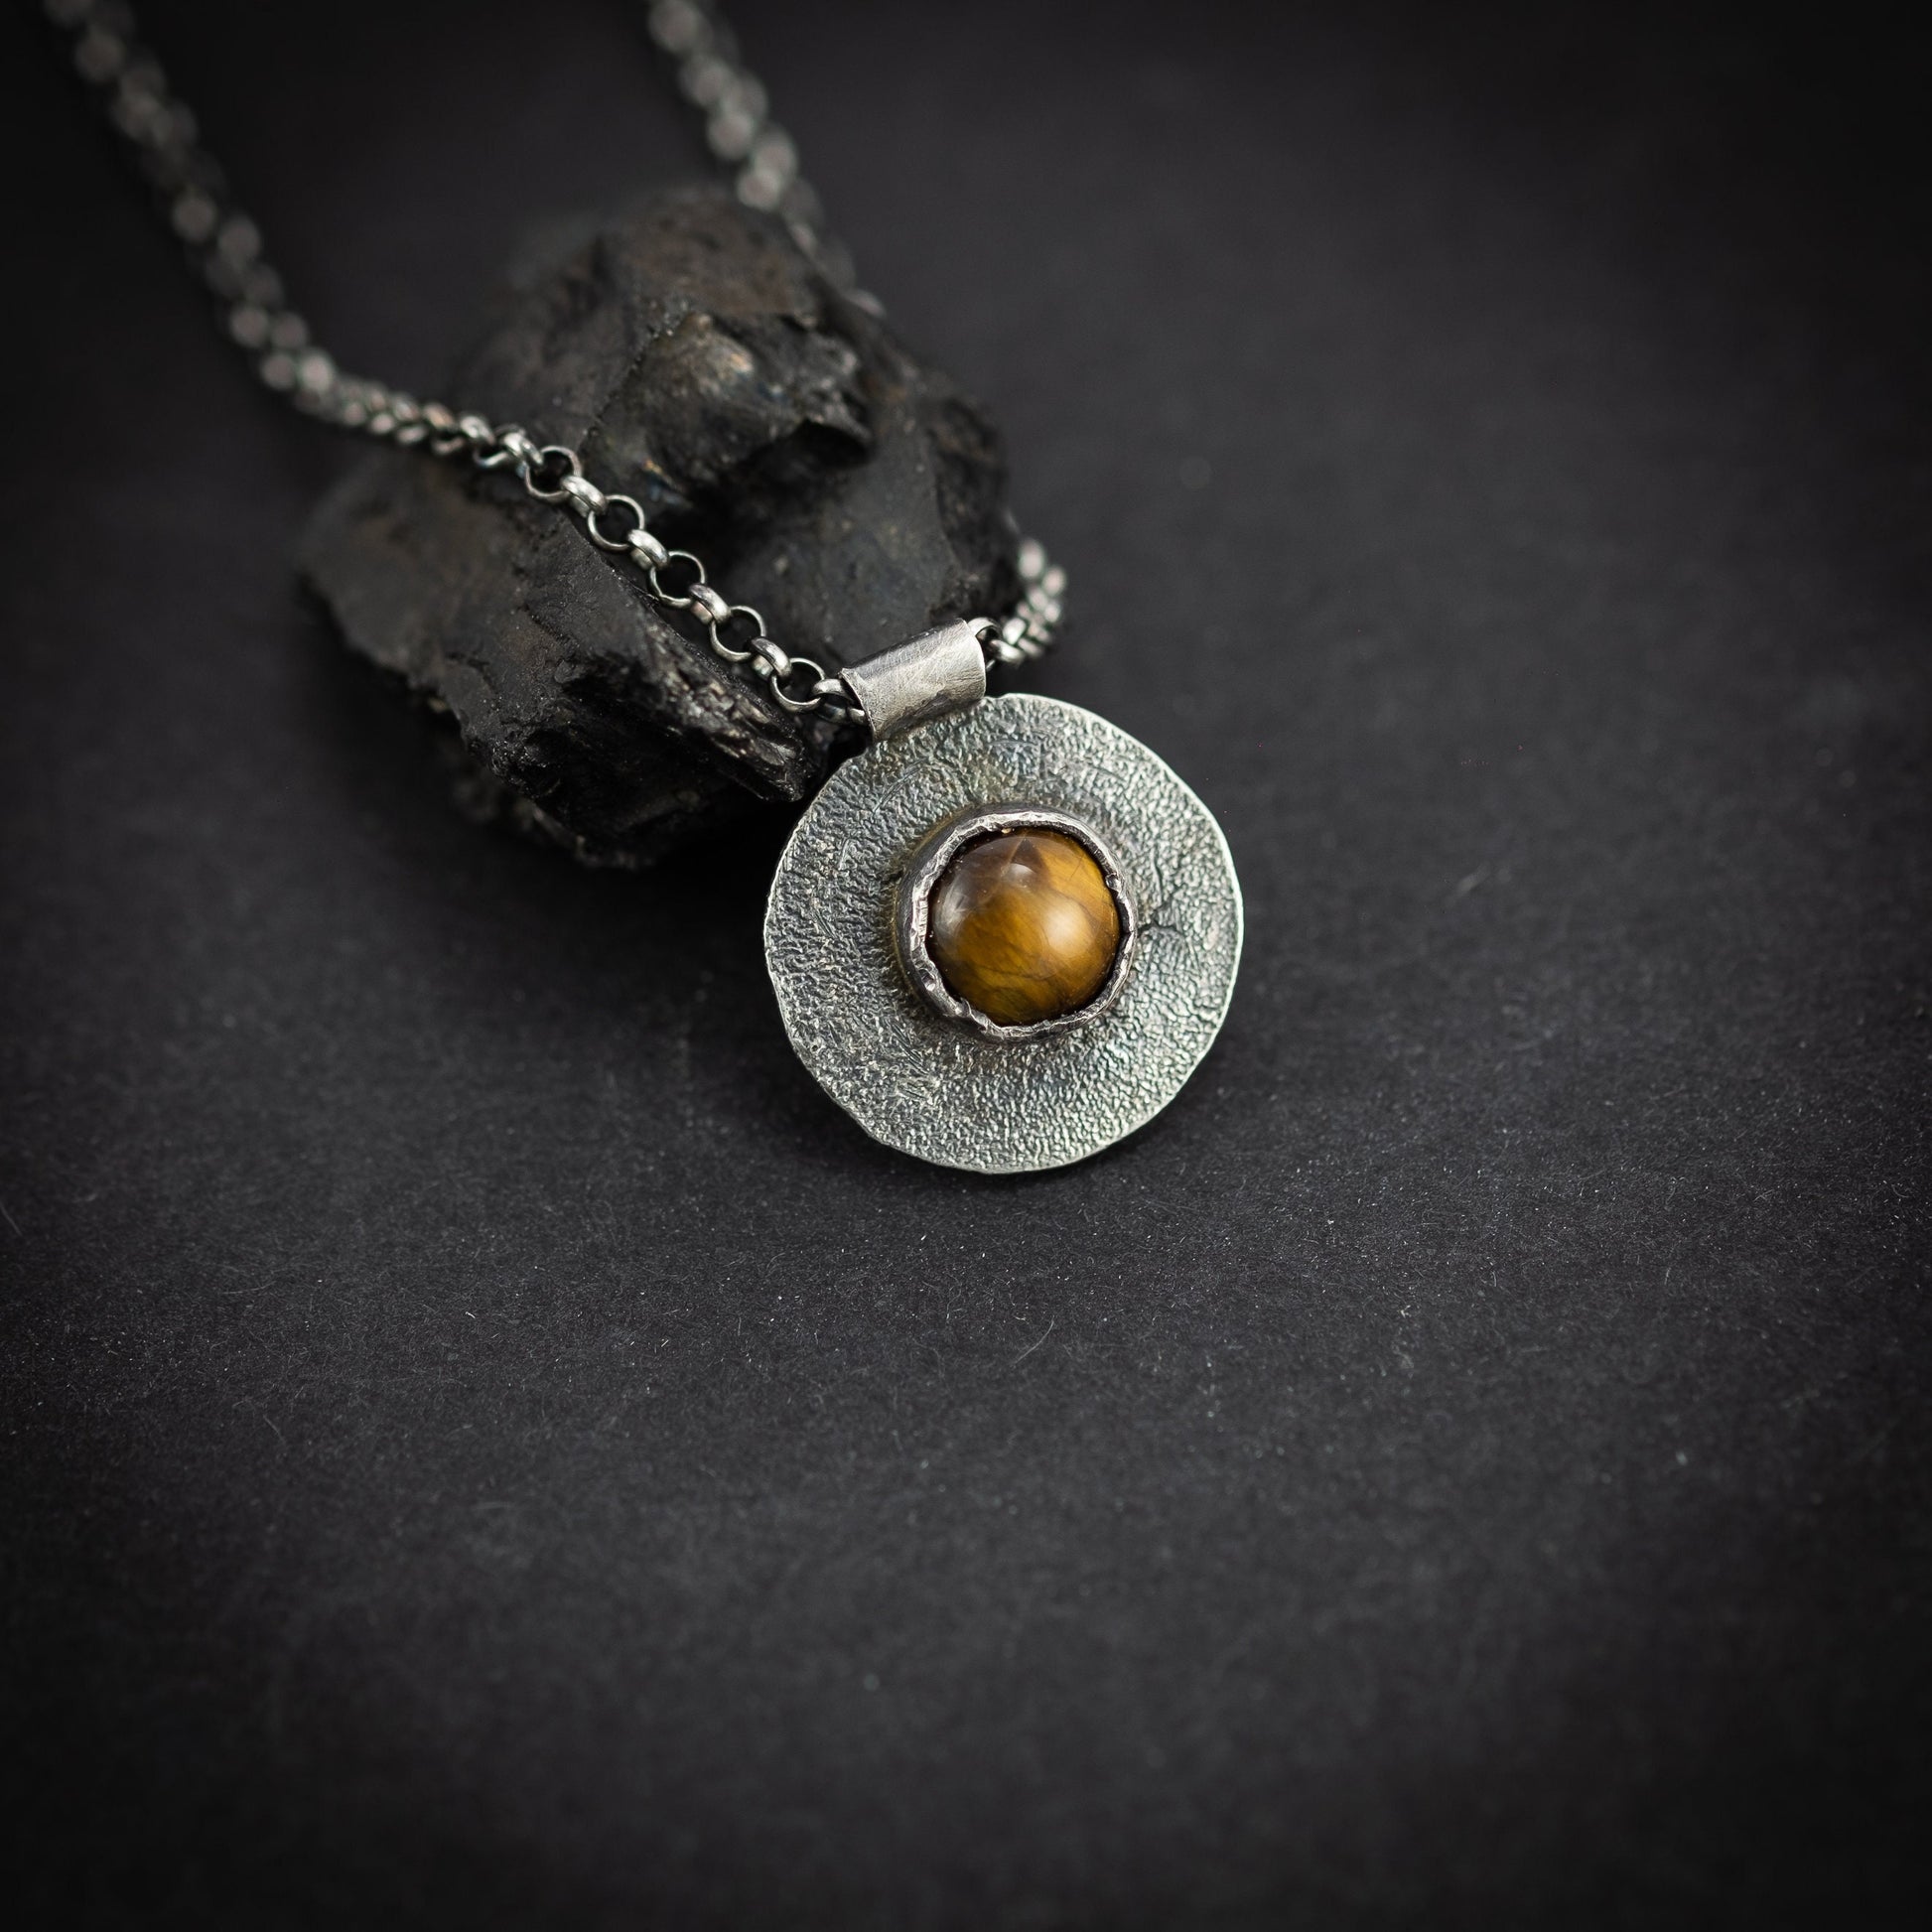 Rustic Silver Necklace with Tiger's eye Gemstone, Gift for her, Crystal pendant, Handmade silver jewelry, Unique girlfriend gift